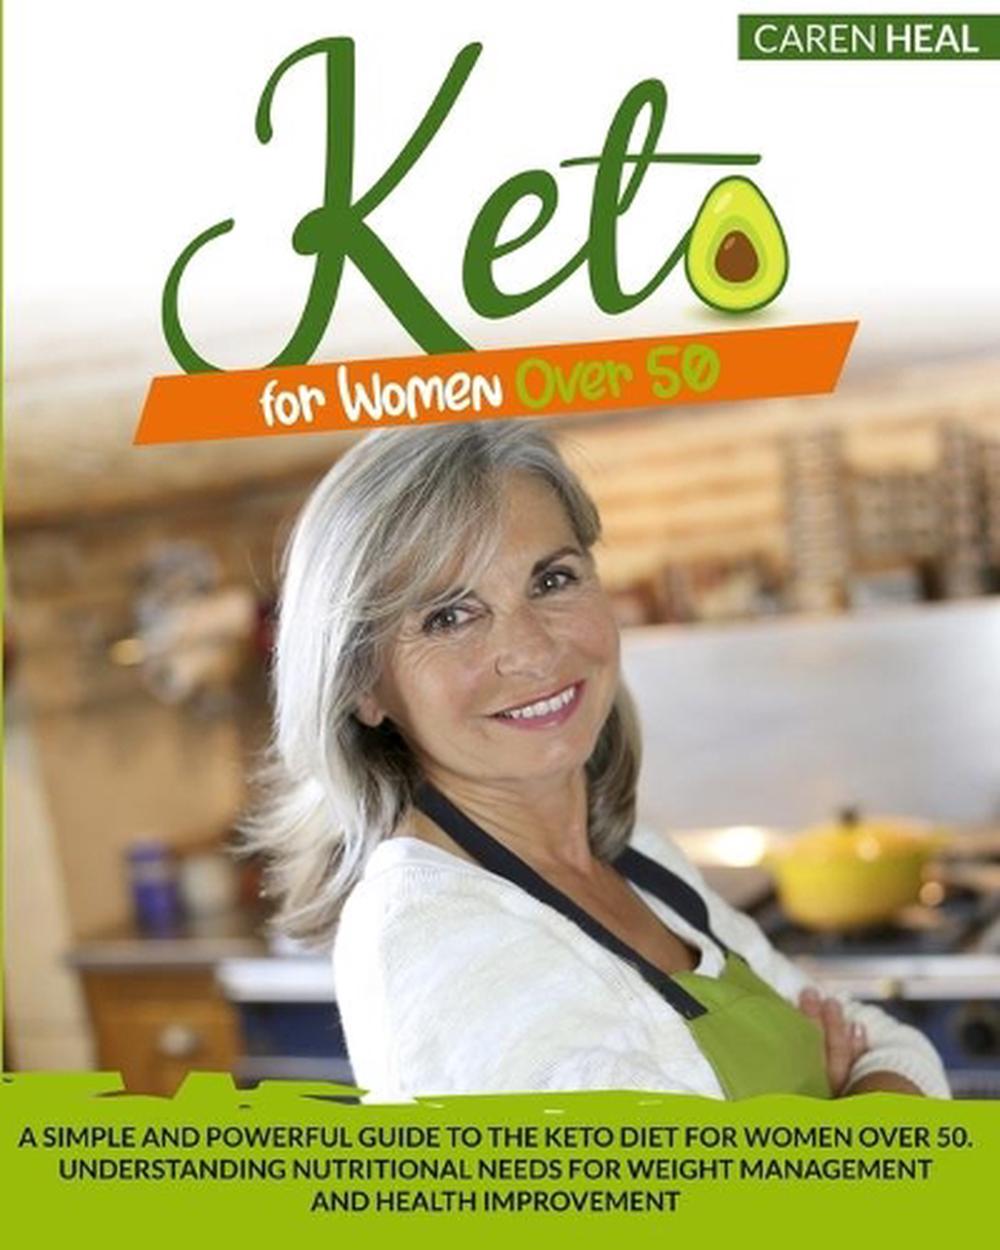 Keto for Women Over 50 by Caren Heal (English) Paperback Book Free ...